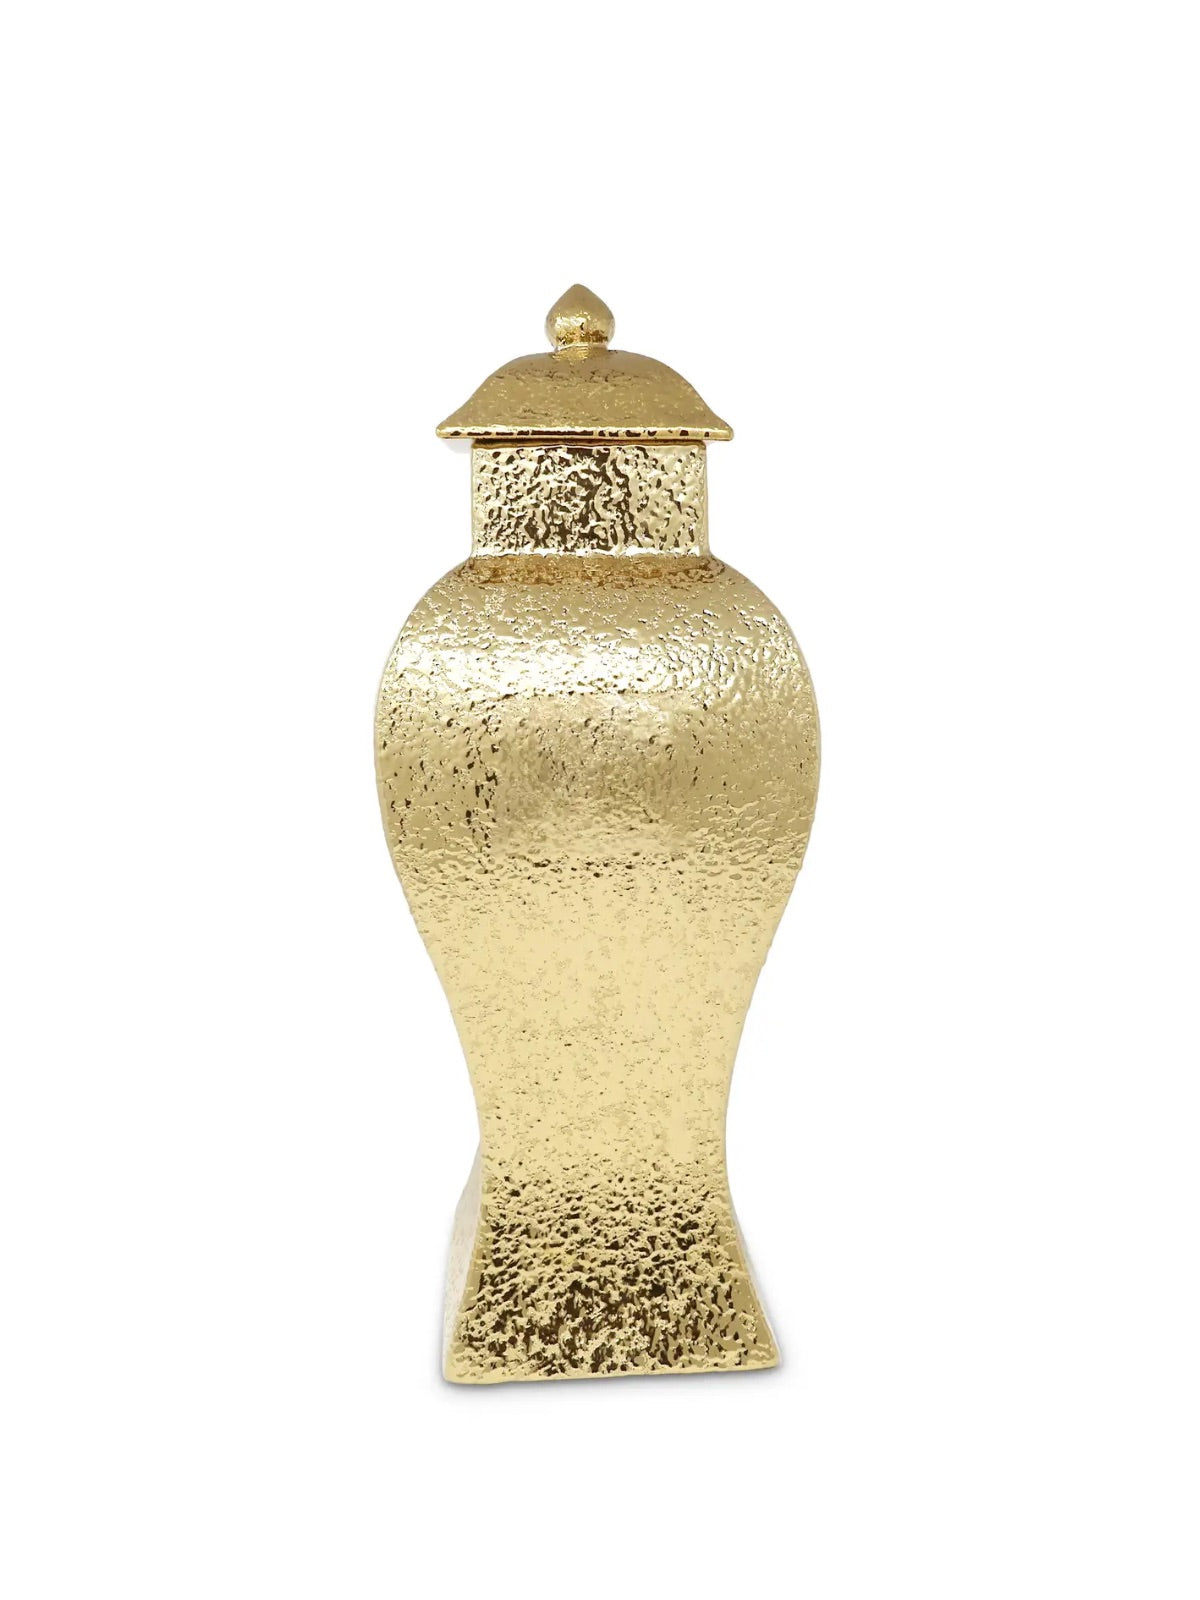 Hammered Gold Ginger Jar with Lid - Luxurious Home Decor Accent - Available in Medium Sizes